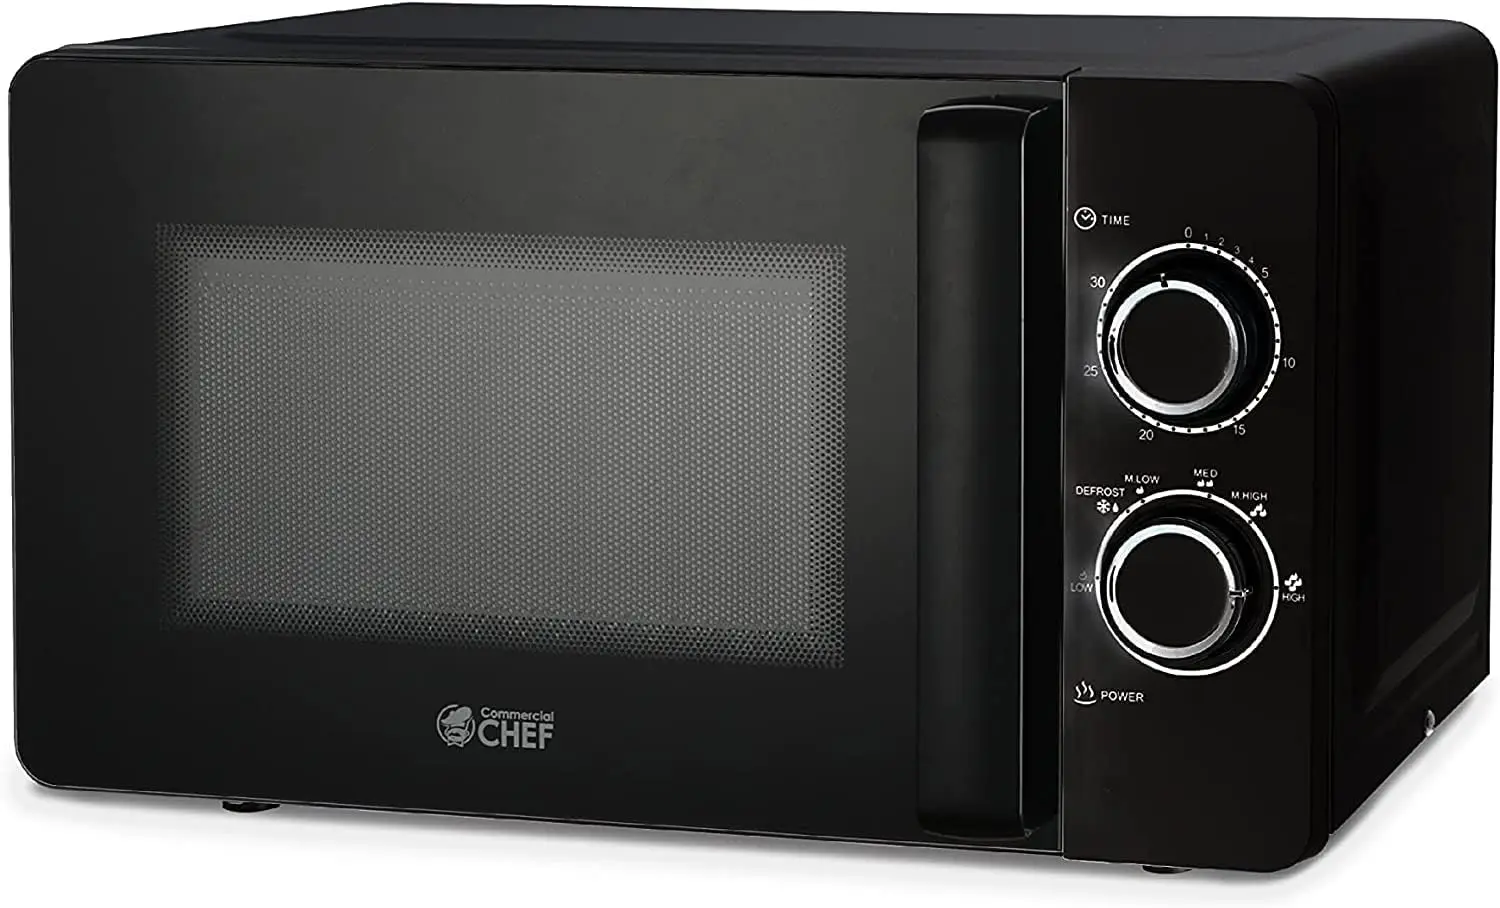 

CHEF Small Microwave 0.7 Cu. Ft. Countertop Microwave with Mechanical Control, Black Microwave with 6 Power Levels, Outstanding